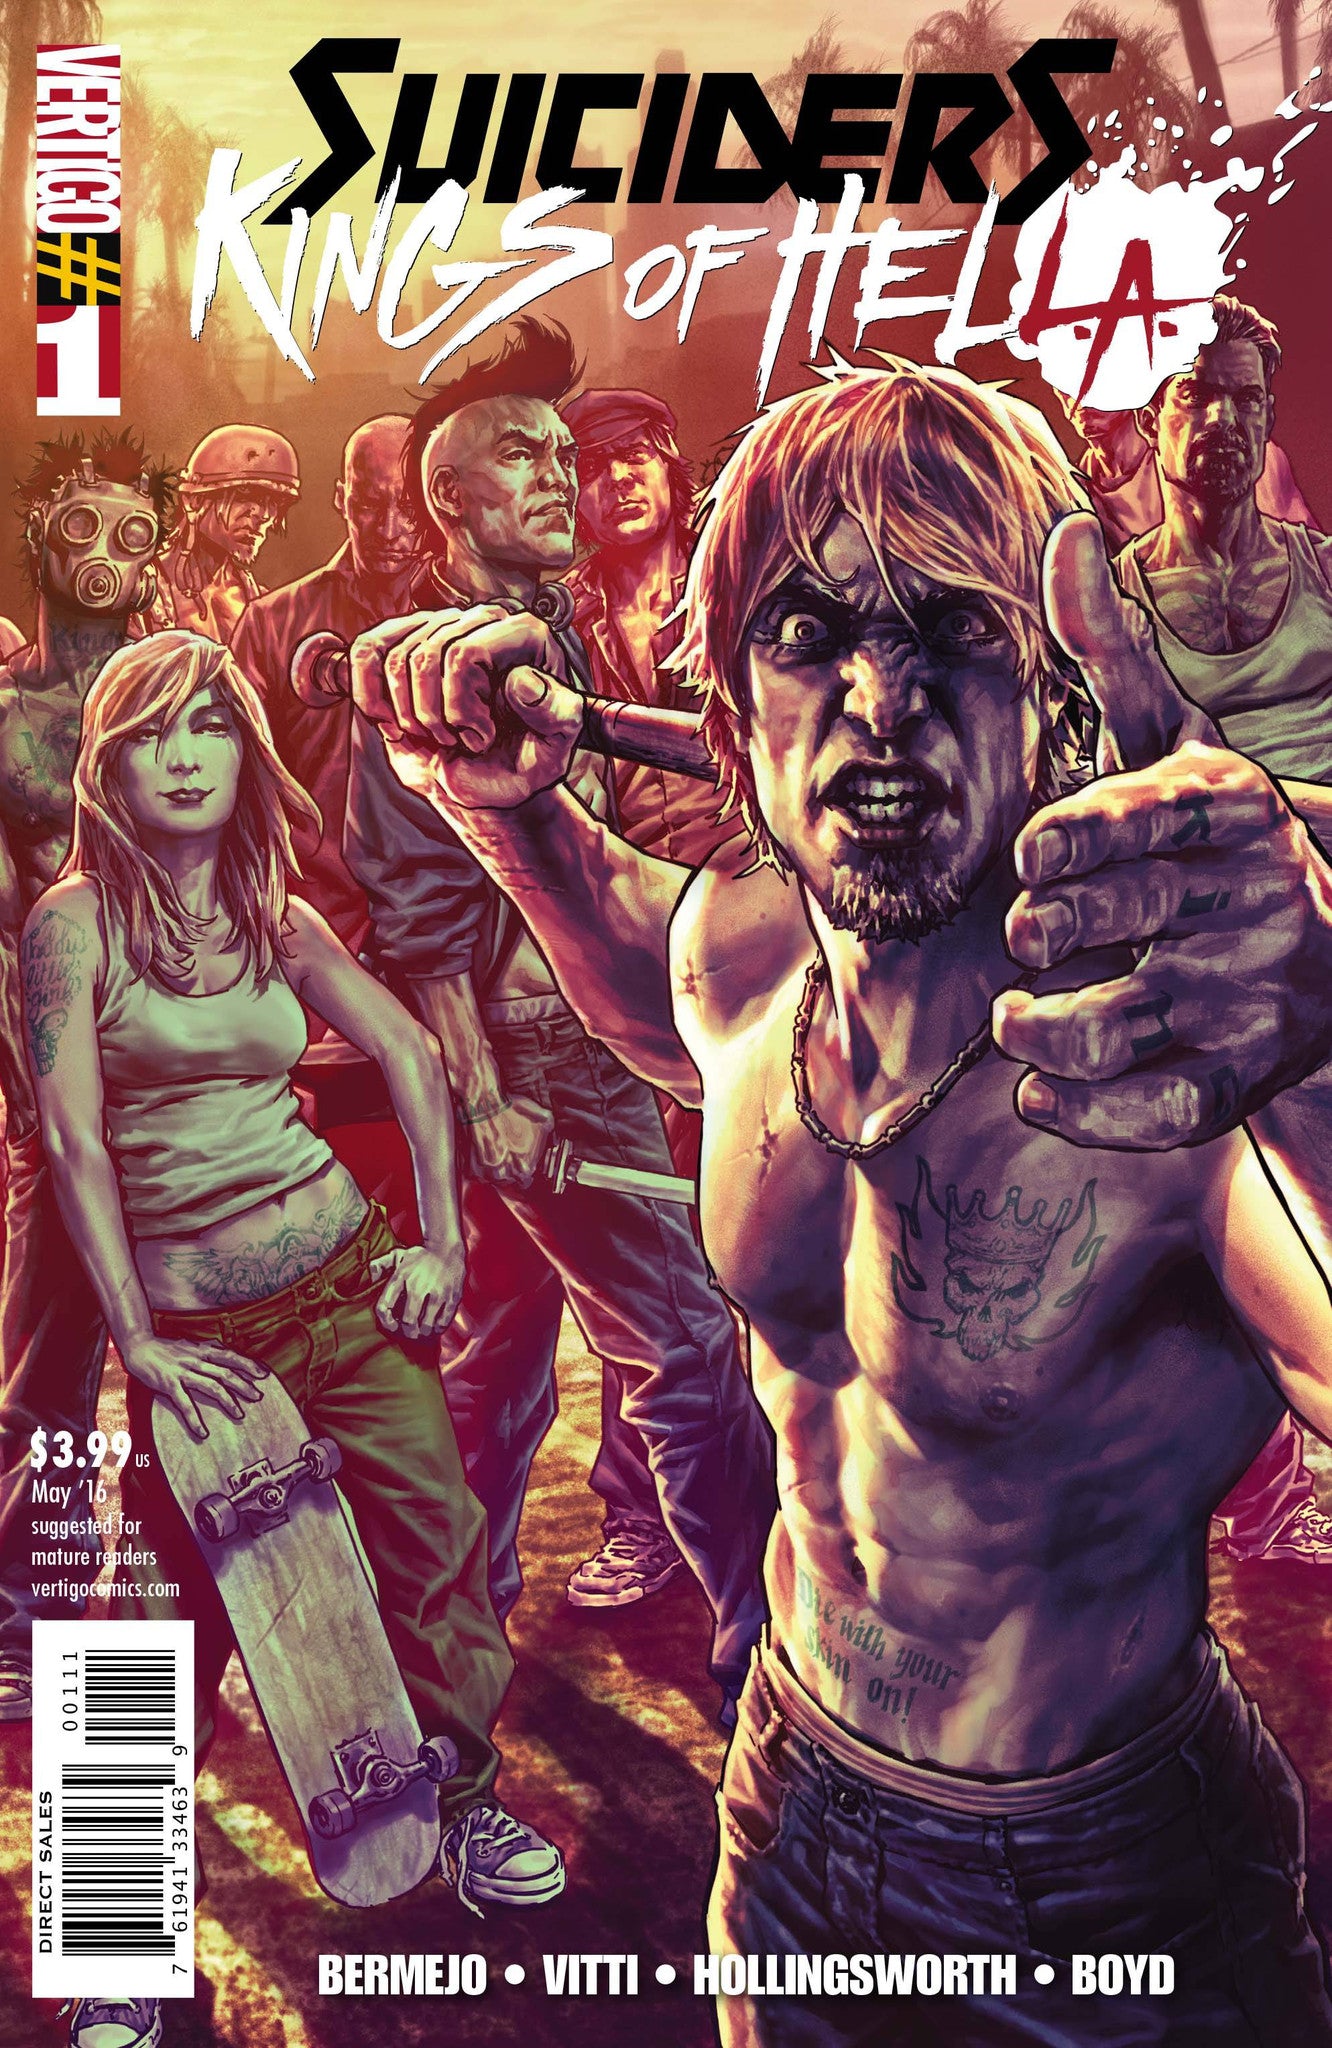 SUICIDERS KING OF HELLA #1 (OF 6) (MR) COVER